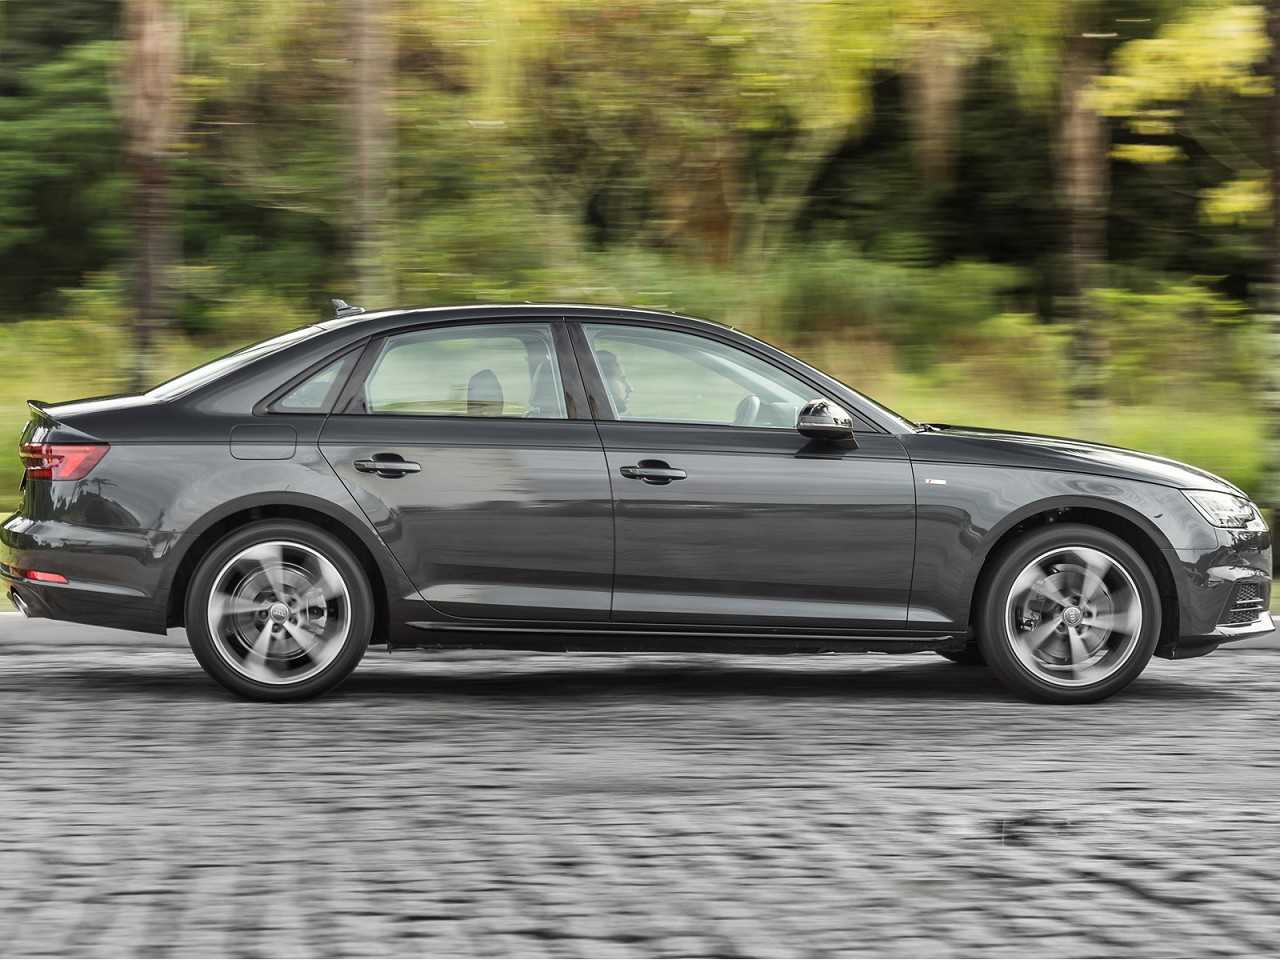 AudiA4 2018 - lateral